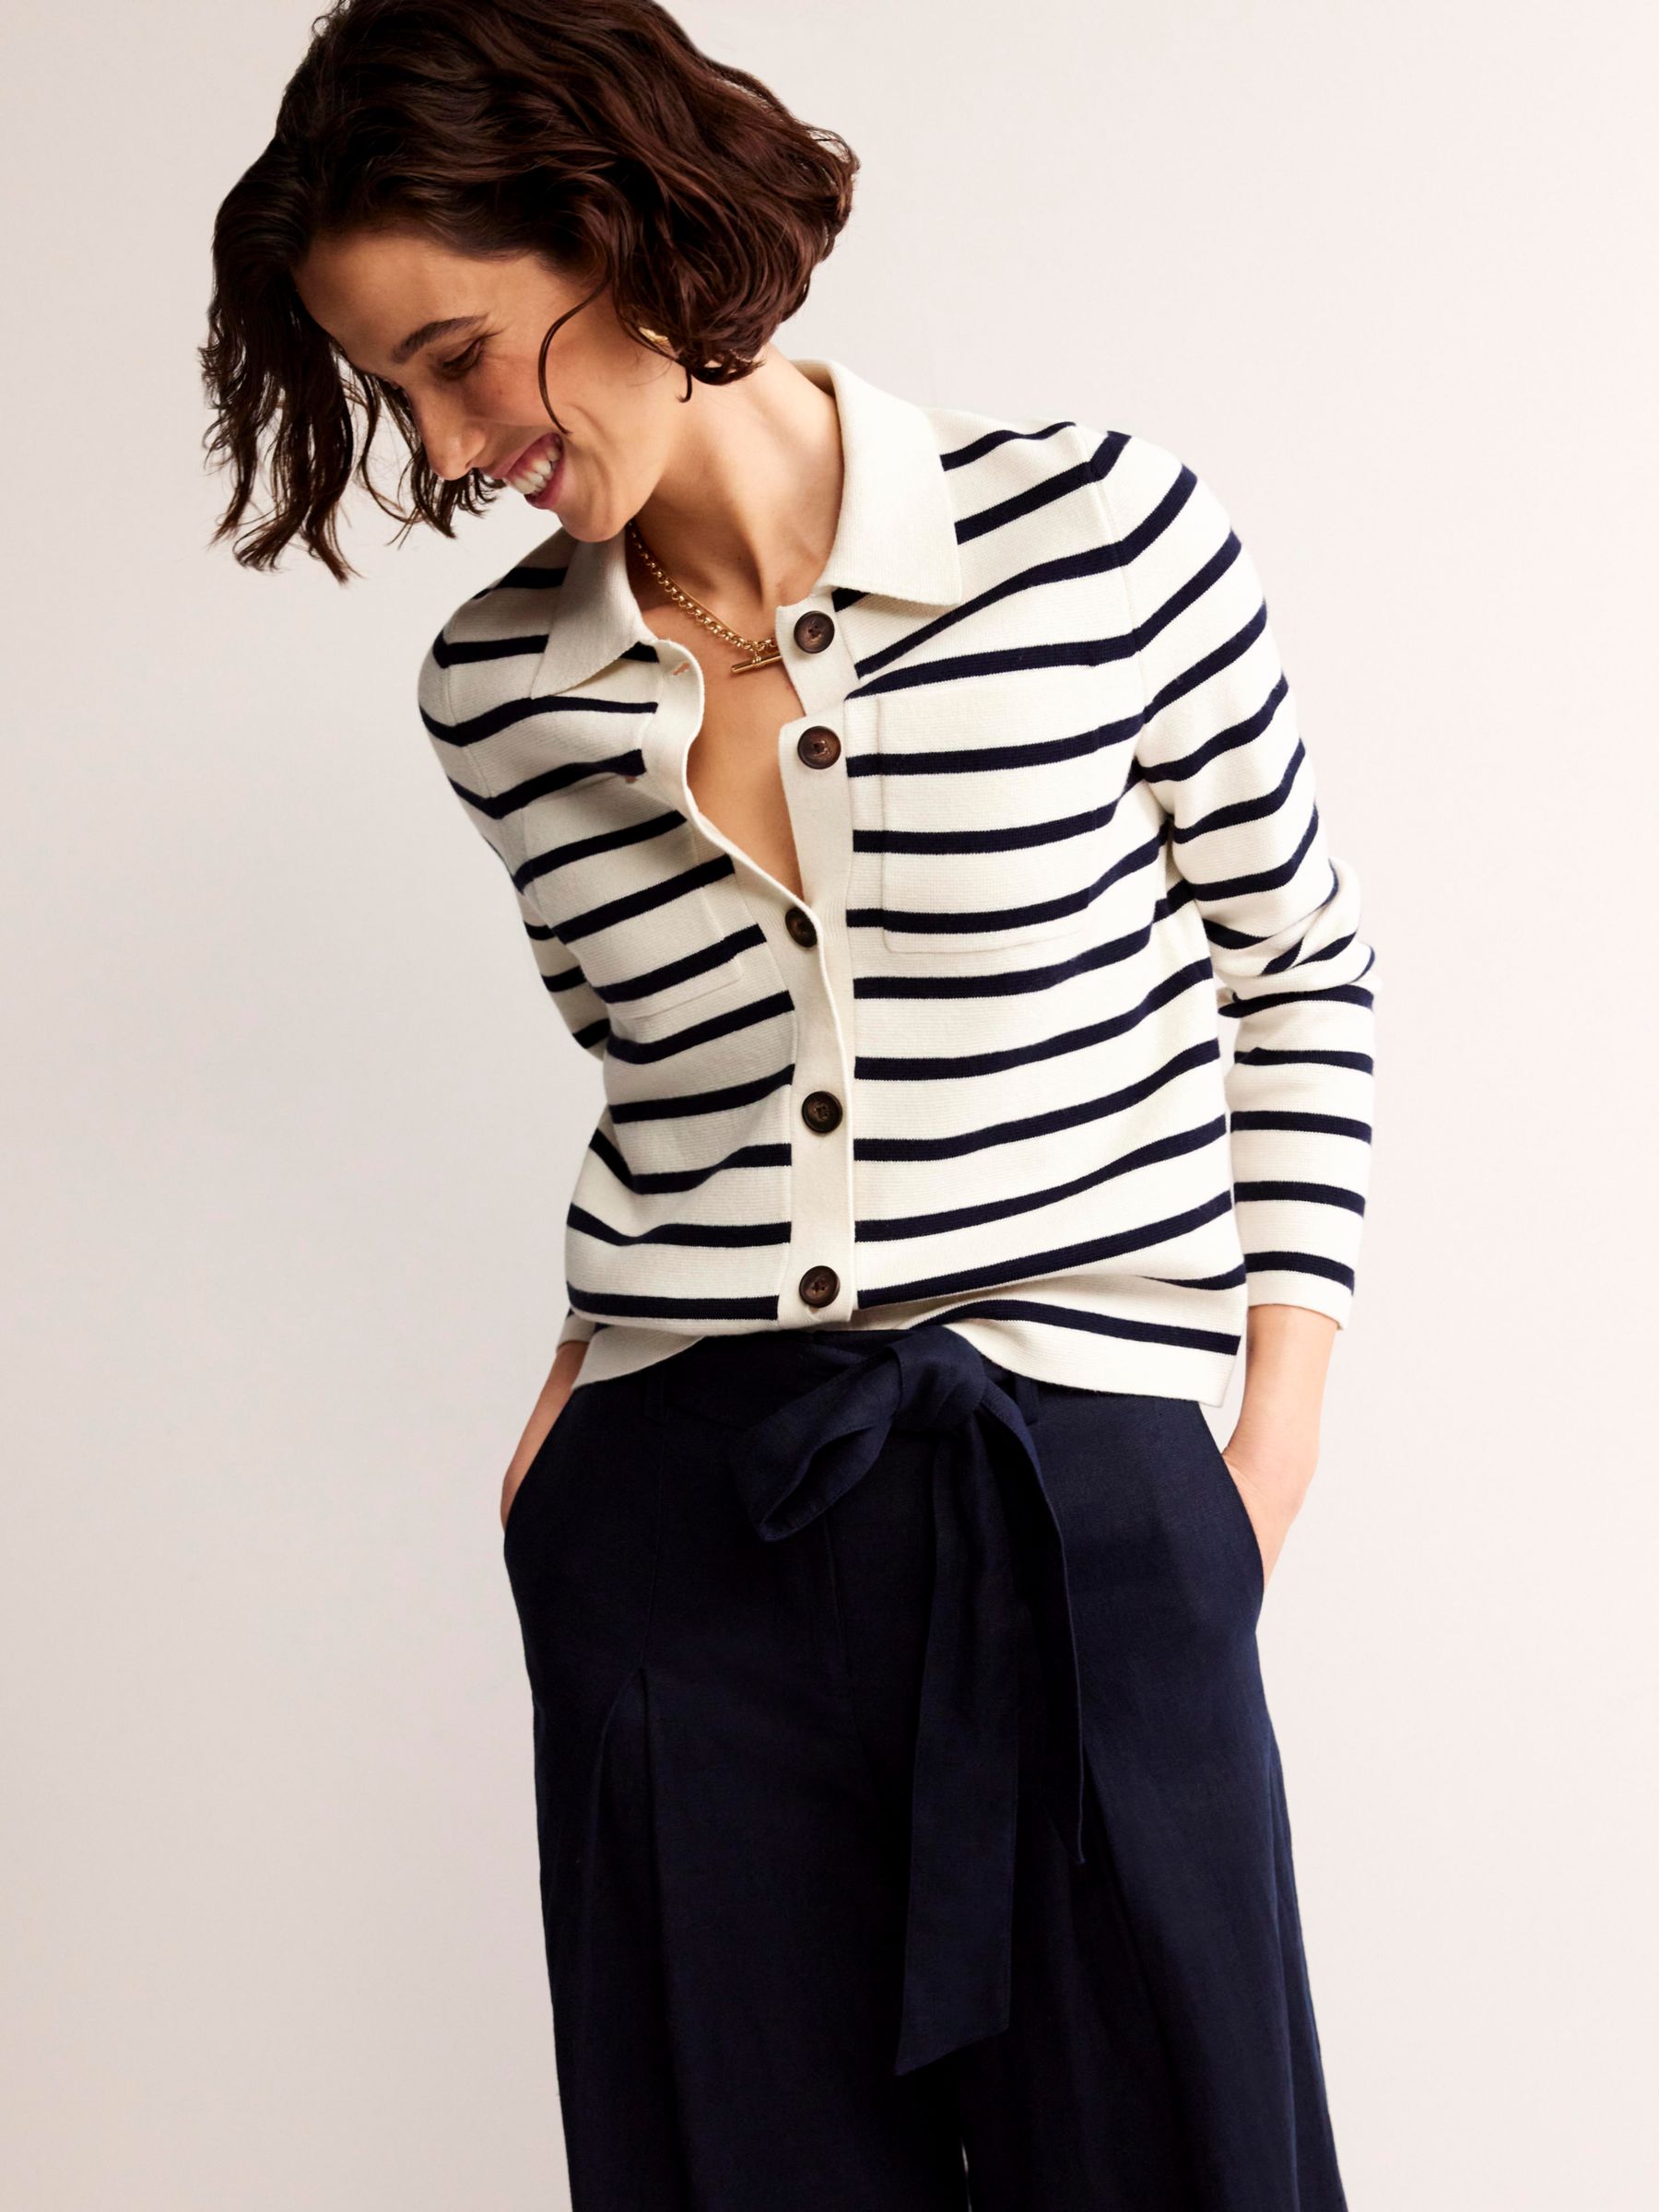 Buy Boden Wool Blend Knitted Cardigan, Warm Ivory/Navy Online at johnlewis.com